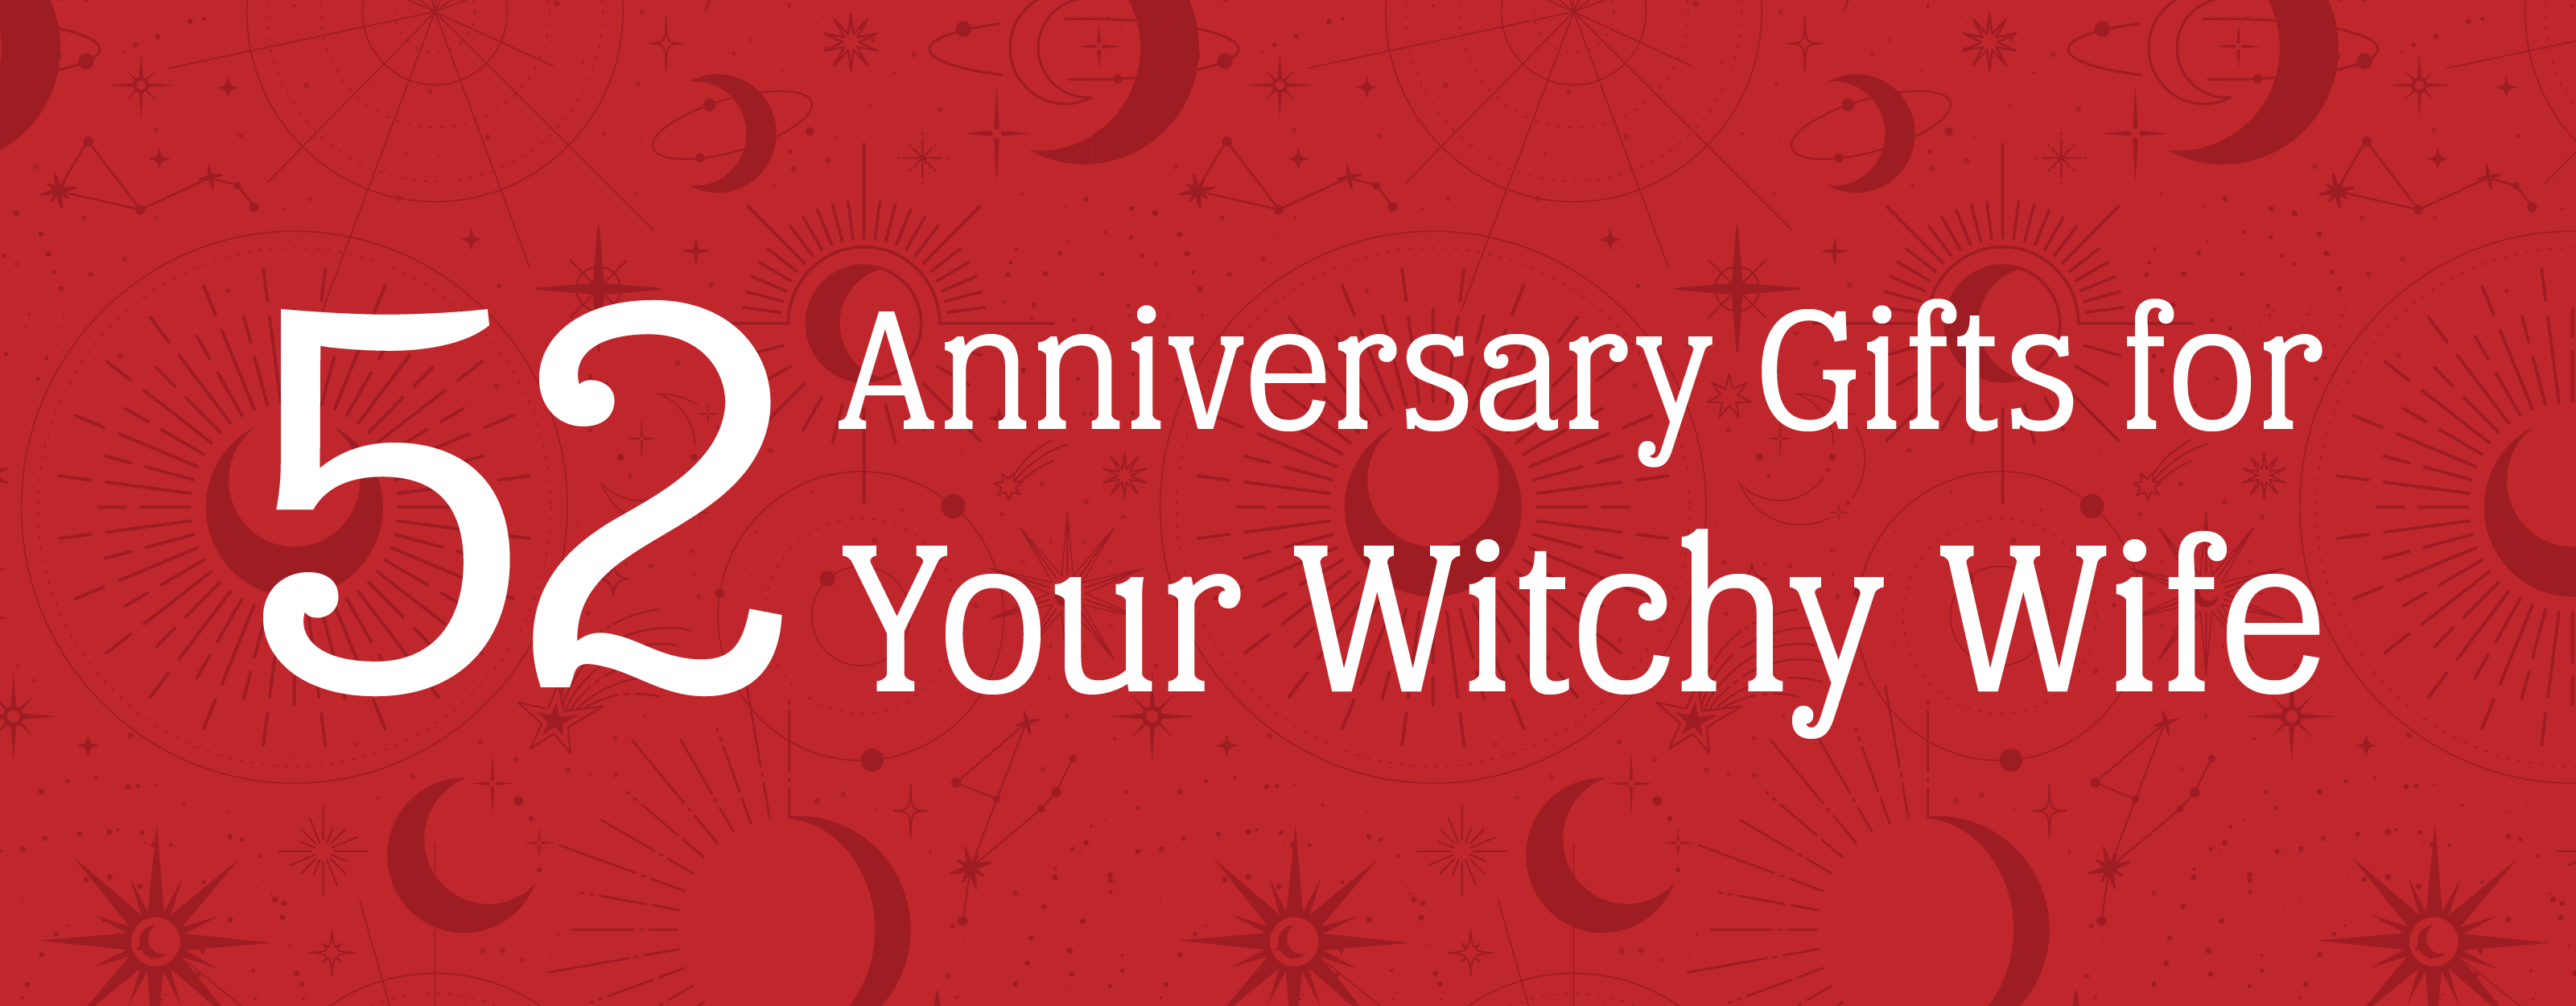 Moon and star pattern on a red background with a white text overlay that reads '52 Anniversary Gifts for Your Witchy Wife